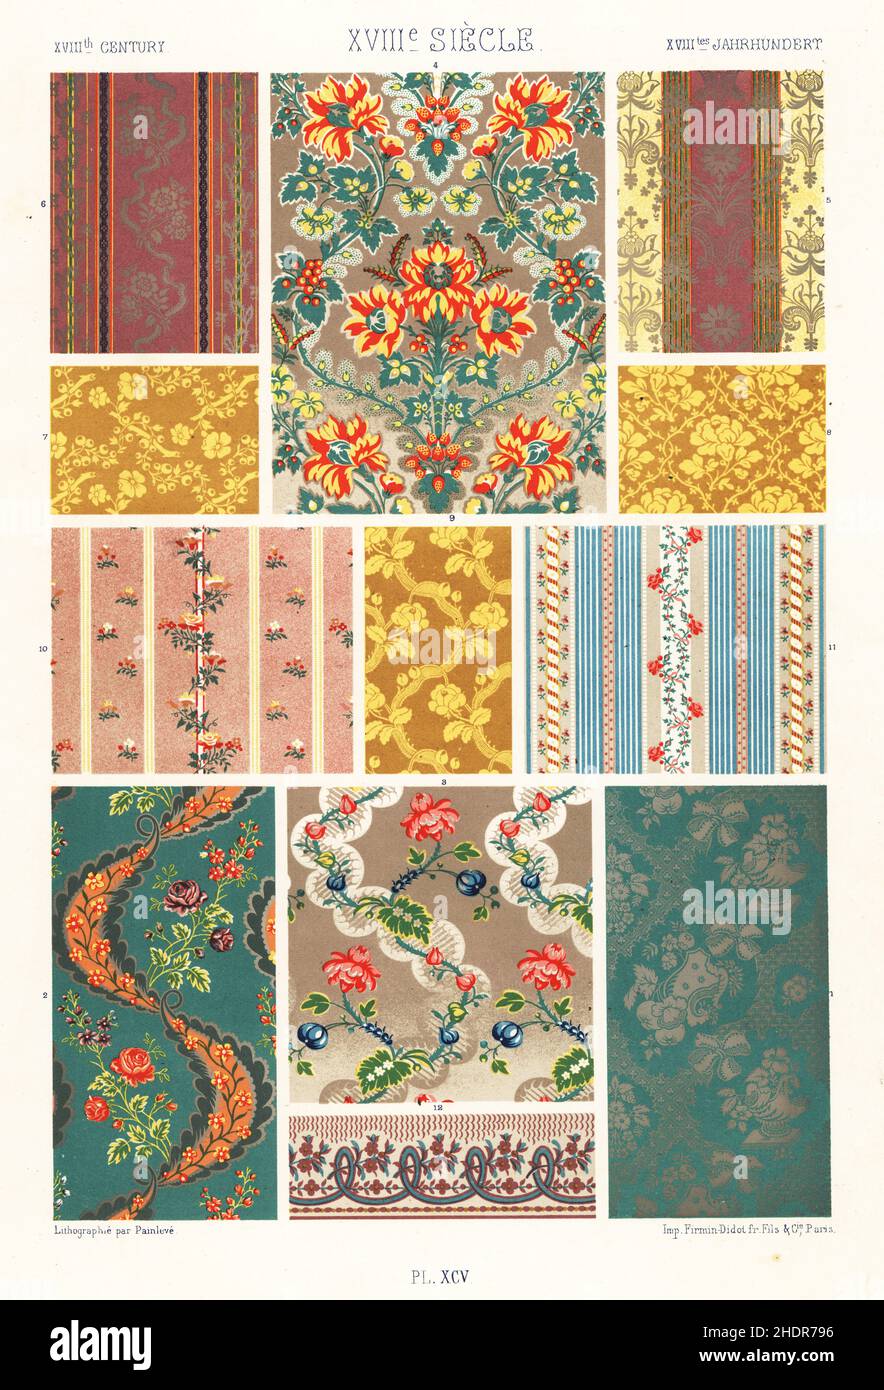 Silk patterns, 18th century. Hangings for furniture and walls, state robes 1-6, hangings in two colours, Louis XVI, 7-9, light silks 10,11, and border 12. XVIIIme Siecle. Hand-finished chromolithograph by Painleve from Albert-Charles-Auguste Racinet’s L’Ornement Polychrome, (Polychromatic Ornament), Firmin-Didot, Paris, 1869-73. Stock Photo